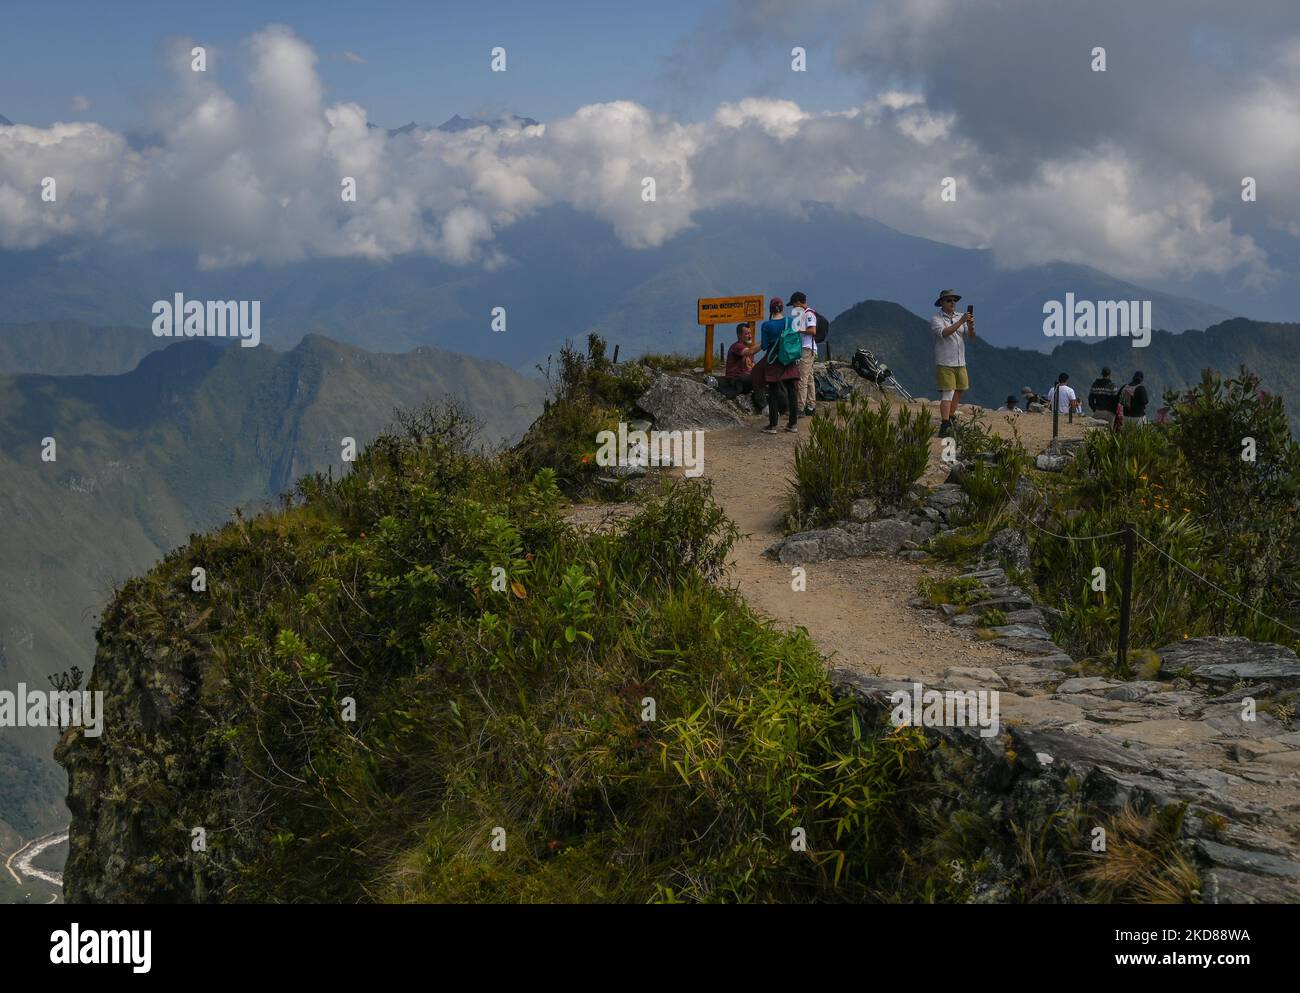 Tourists enjoy a view of of the ancient Inca city of Machu Picchu located in the Andes at an altitude of 2,430 meters (7,970 feet) from the top of Machu Picchu mountain (3,061 metres). The most famous icon of the Inca civilization was declared a Peruvian Historical Sanctuary in 1981, a UNESCO World Heritage Site in 1983, and in 2007 was then declared one of the Seven New Wonders of the World. On Wednesday, 20 April 2022, in Historic Sanctuary of Machu Picchu, Urubamba Province, Peru. (Photo by Artur Widak/NurPhoto) Stock Photo